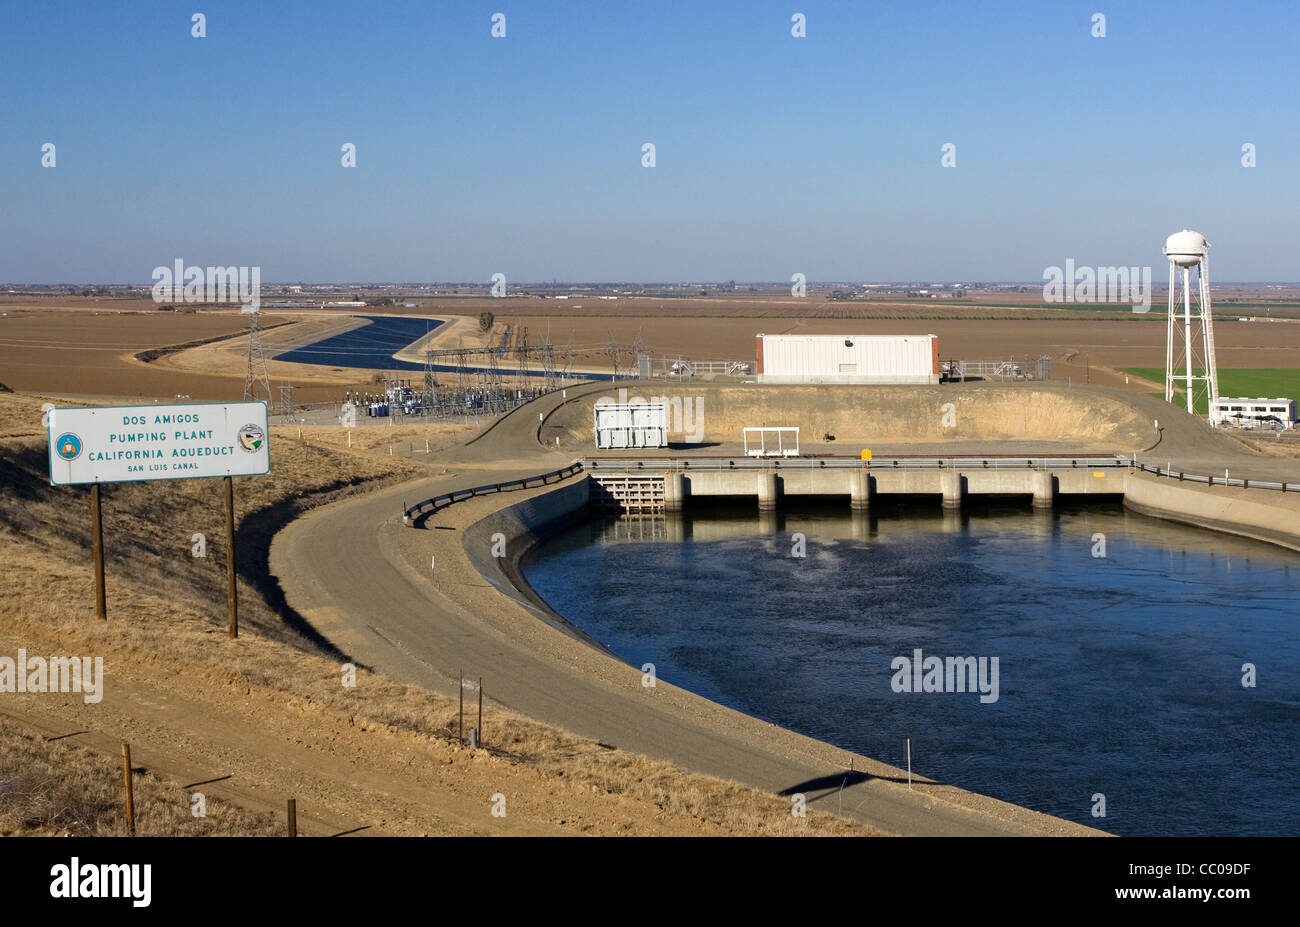 The California Aqueduct transports water from the Sierra Nevada Mountains of Northern California to Southern California. Stock Photo